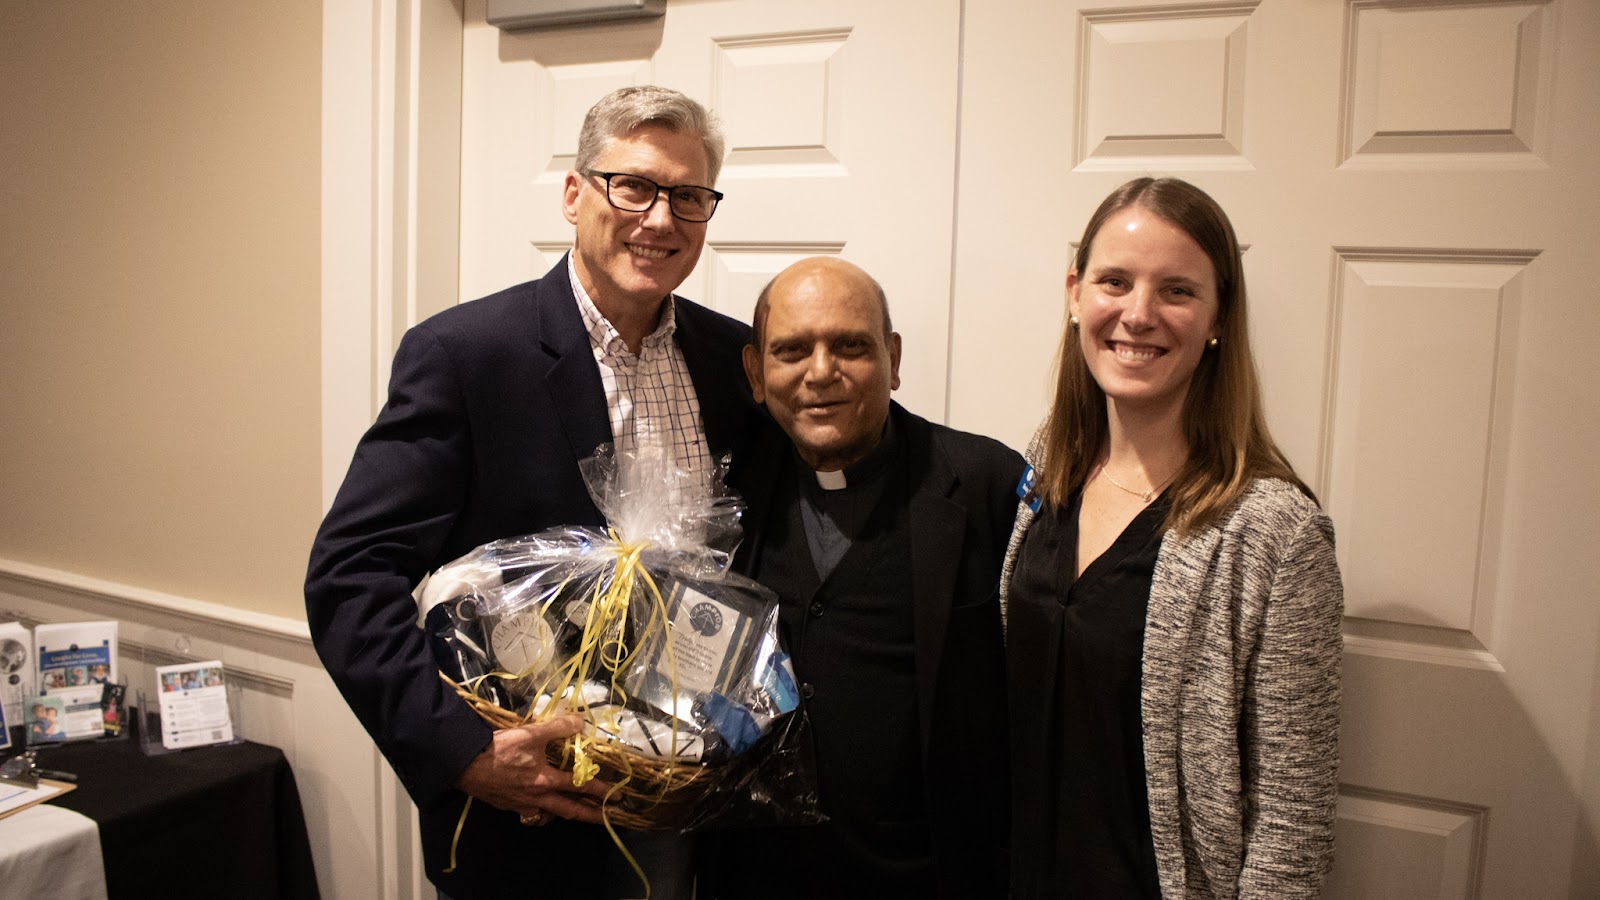 Dan (left) is honored with a MSC Champions basket with Msgr. Gregory and Executive Director of MSC USA, Betsy Fountain.